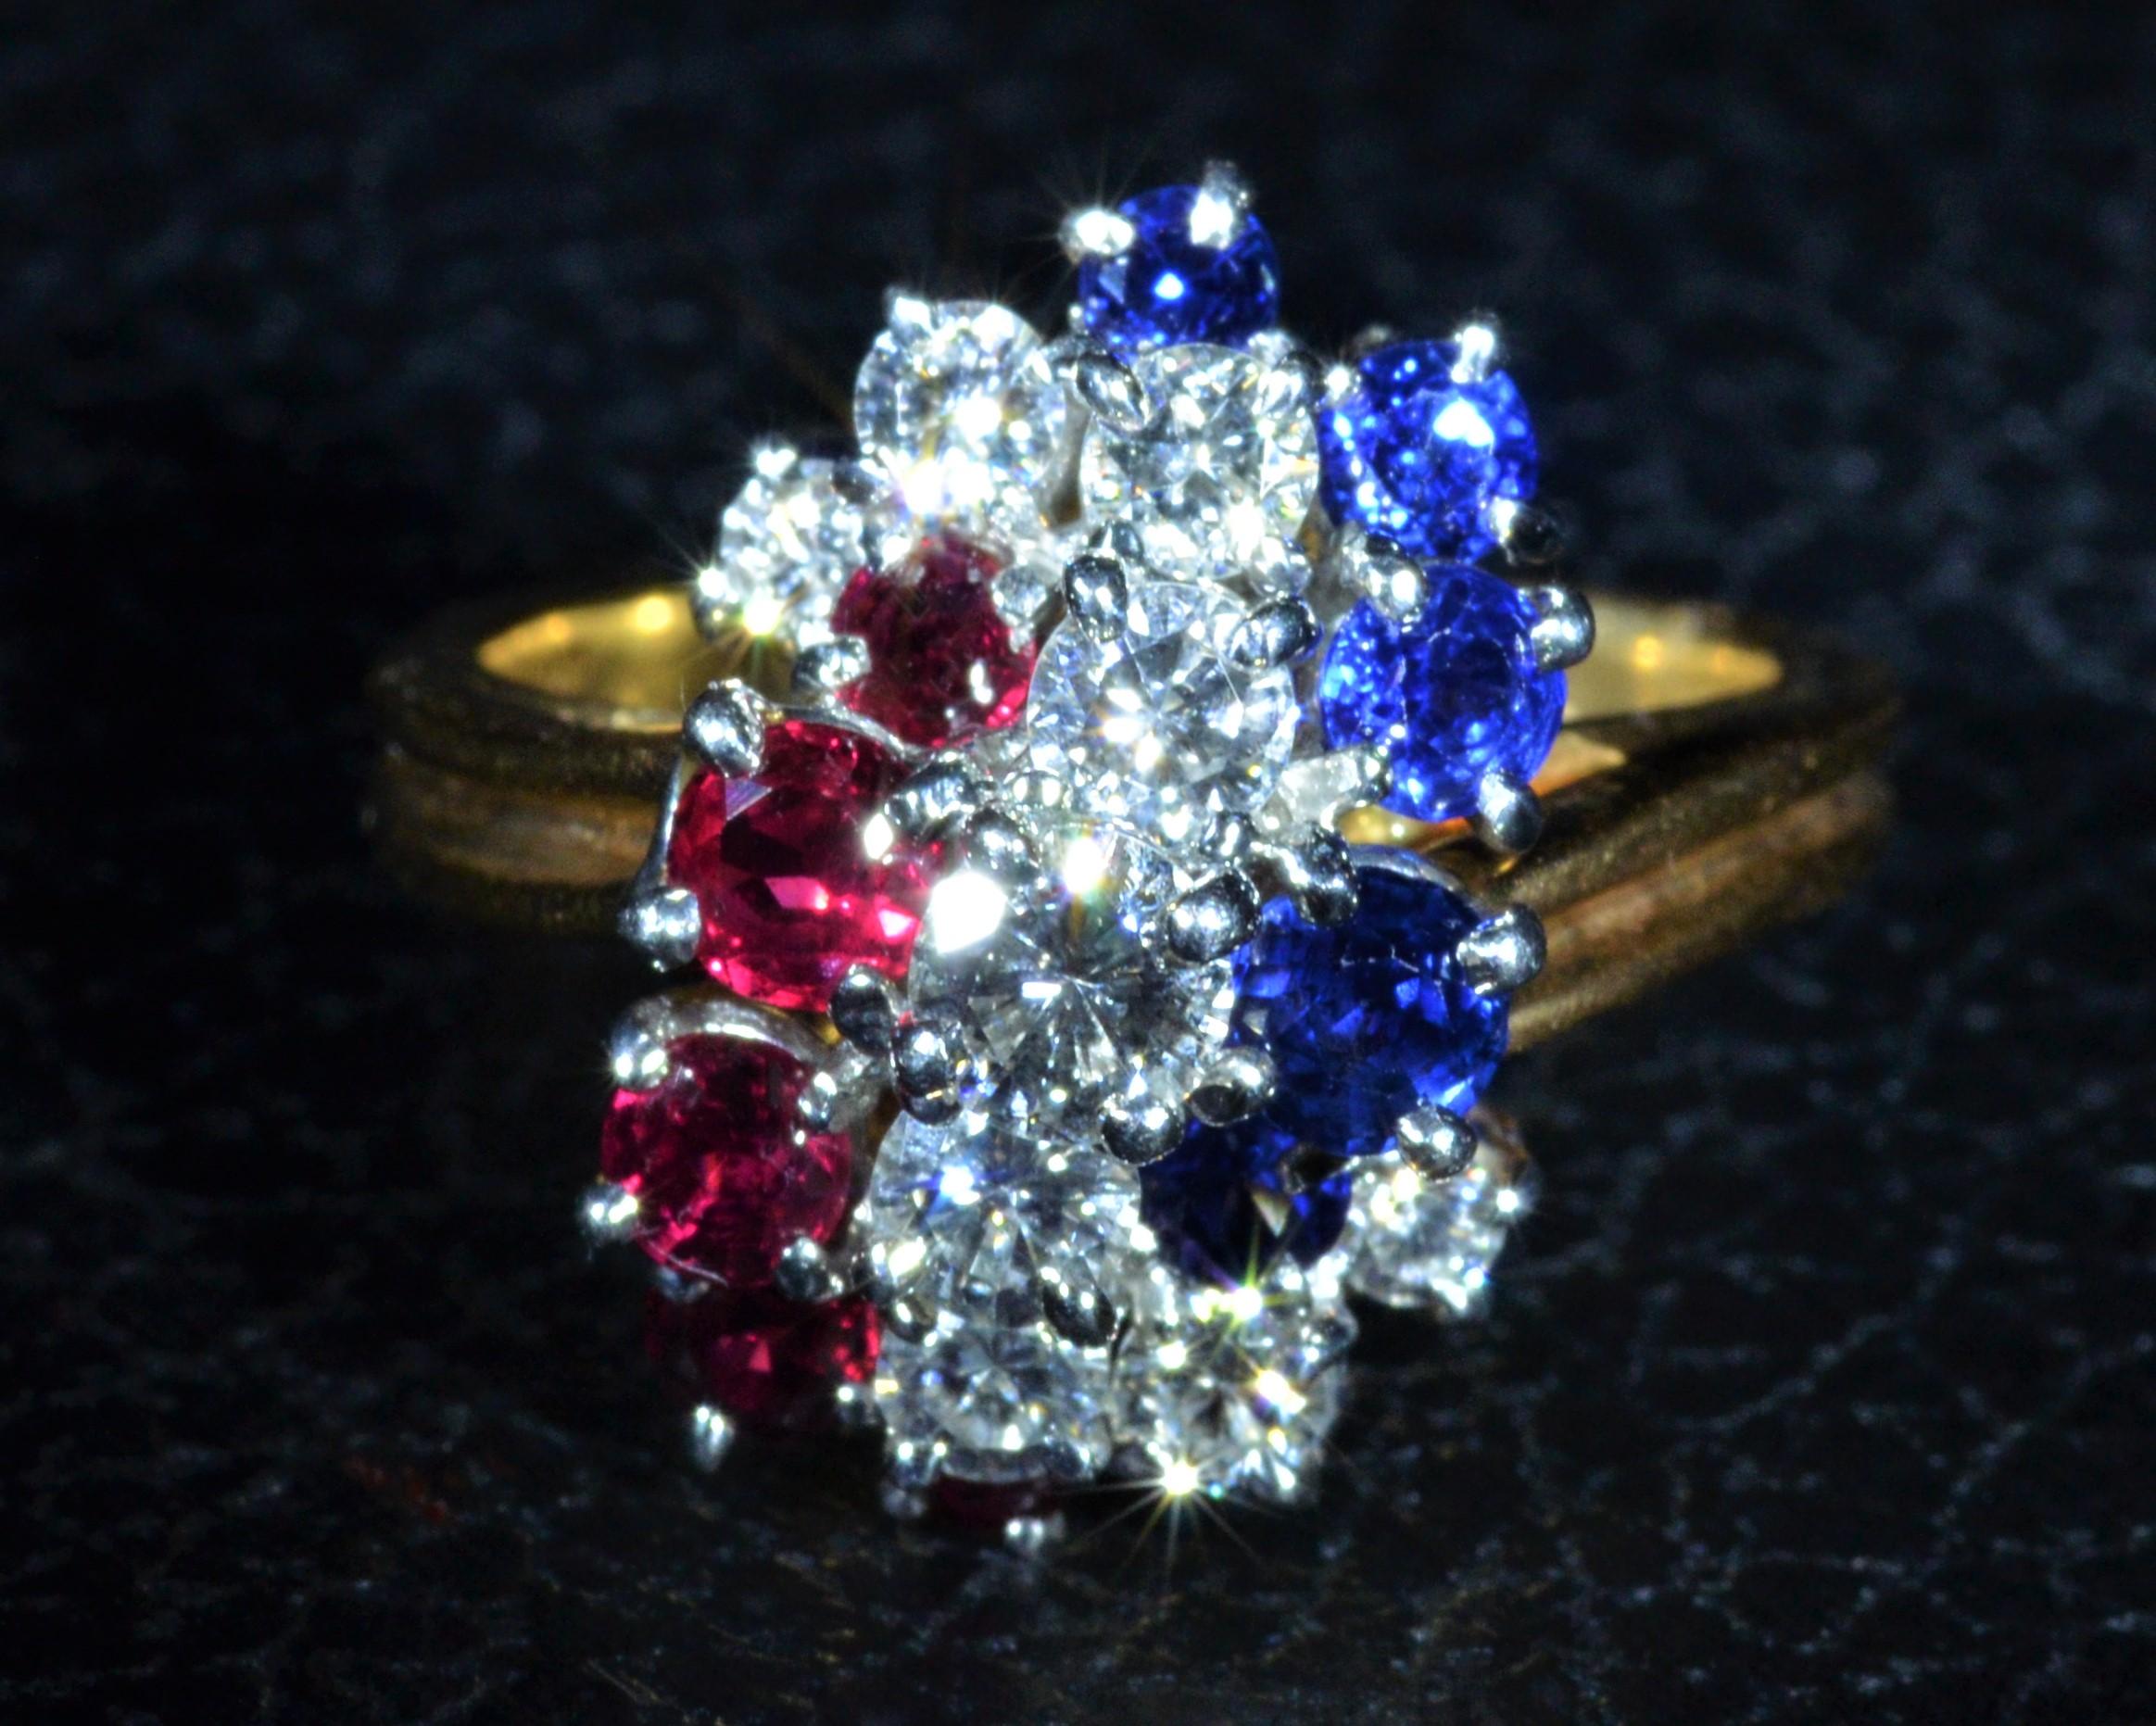 Vintage Signed Oscar Heyman Patriotic Ring featuring Rubies, diamonds, and sapphires.  The ring is made in 18 karat yellow gold and has platinum boxes hold in each stone.  There are approximately 0.75 carats in Natural very slightly purplish-Red